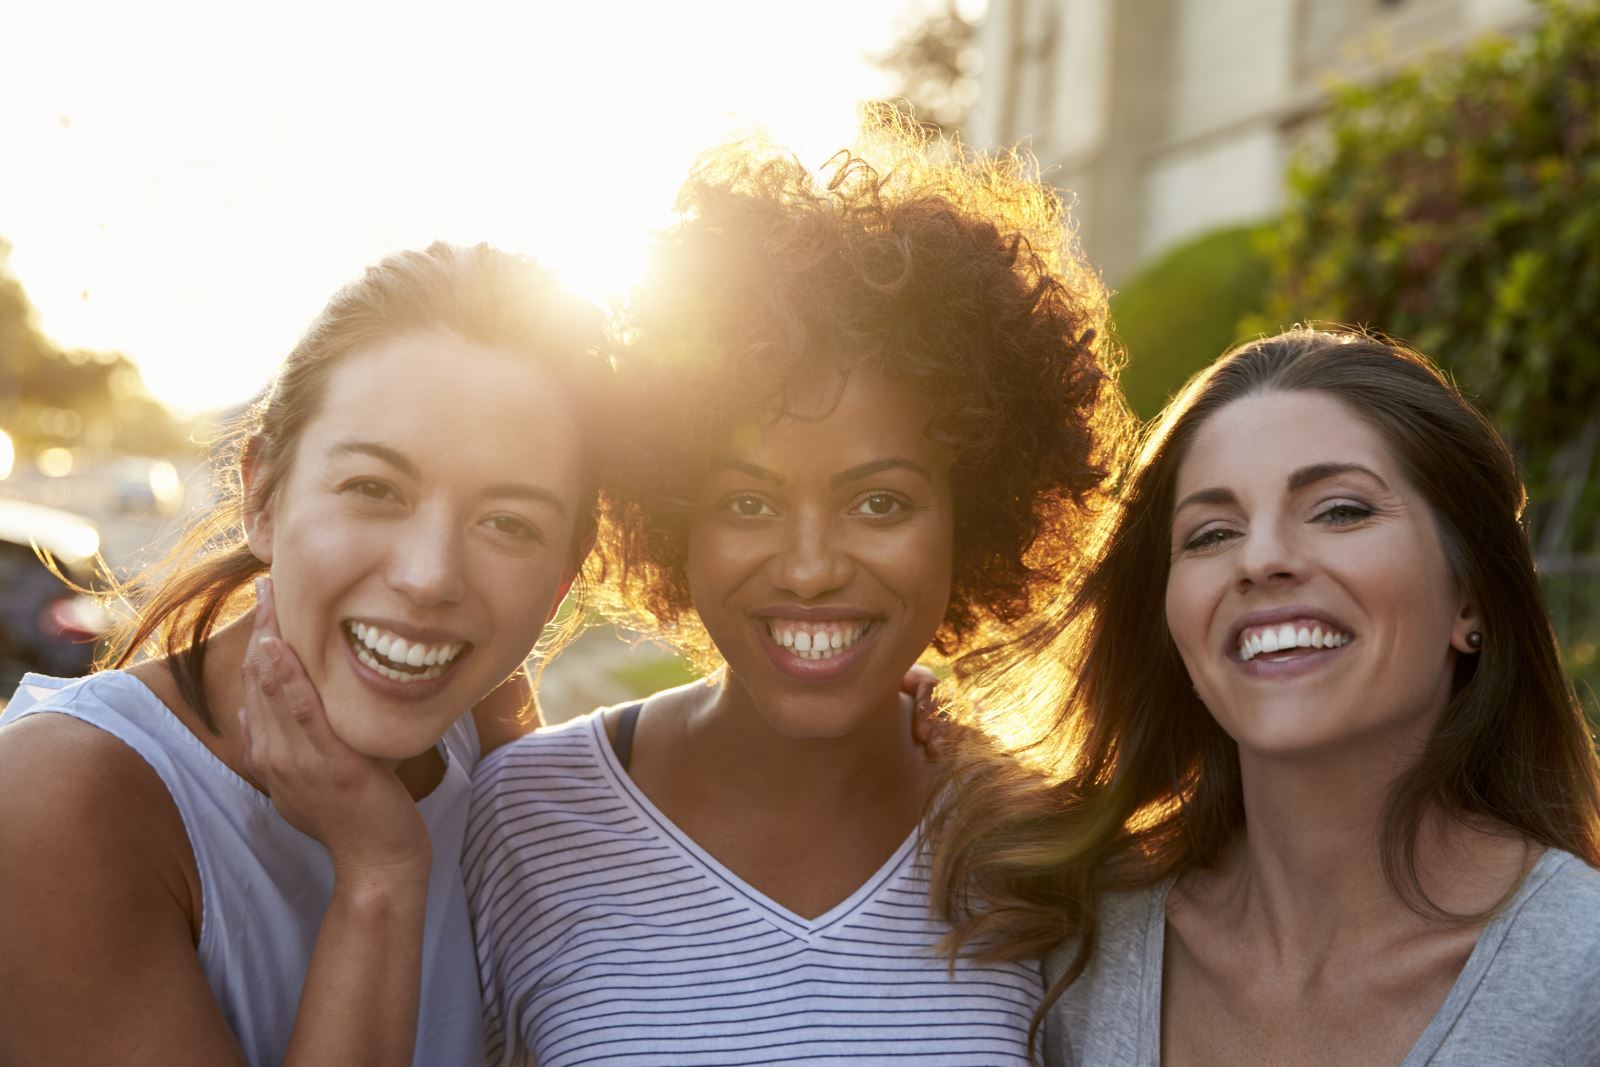 Three smiling women of different ages and ethnicities looking into the camera with the sun behind them.